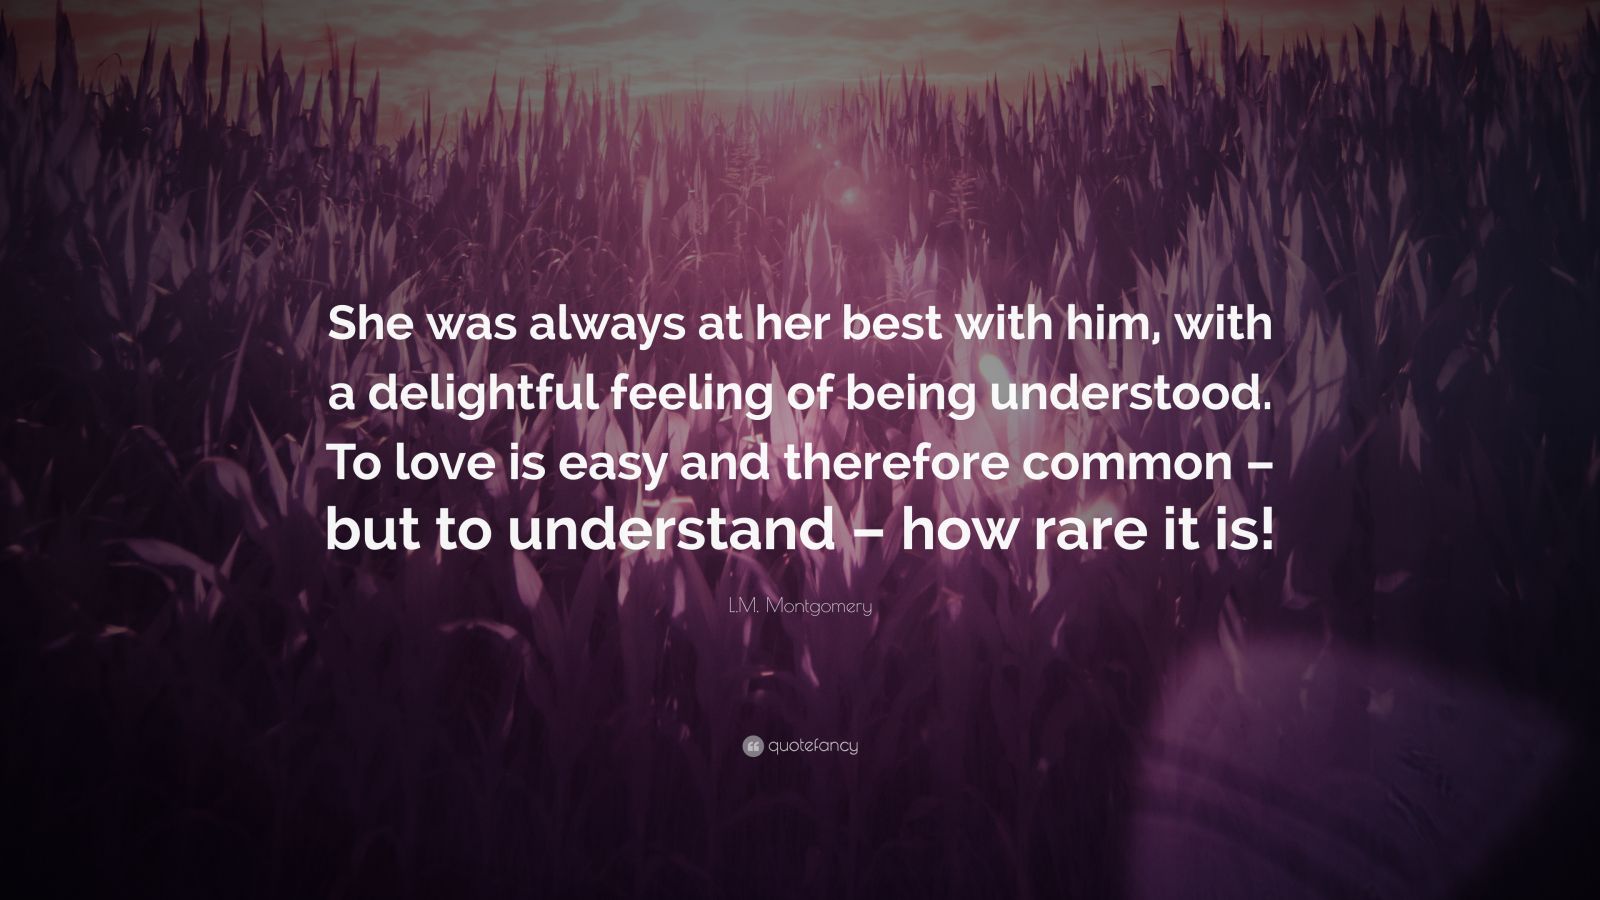 L.M. Montgomery Quote: “She was always at her best with him, with a ...